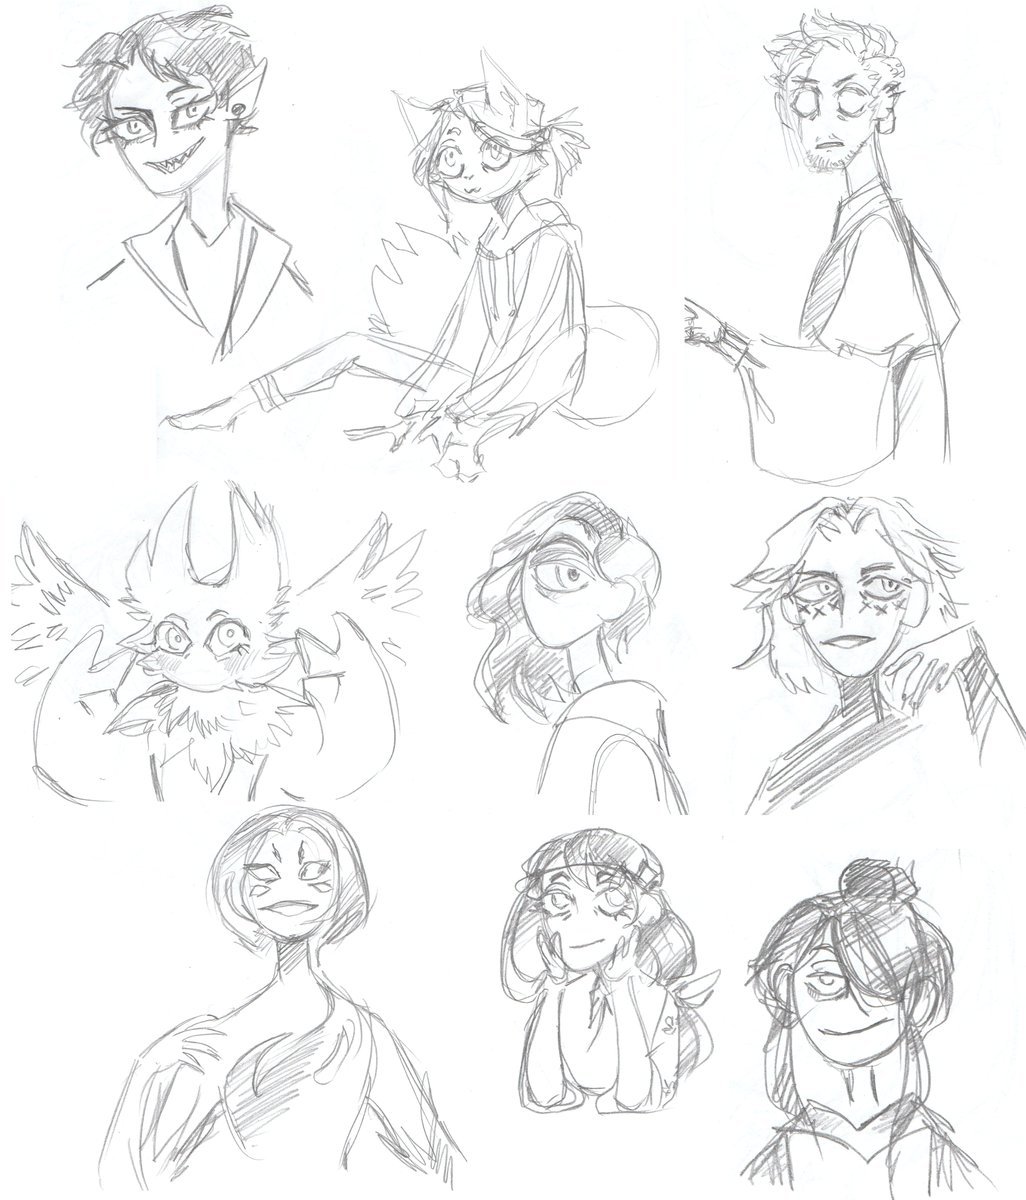 Yo I scanned low-effort sketches of your sonas from a while ago
Im sorry I wont tag everyone
But feel free to use this however you want 